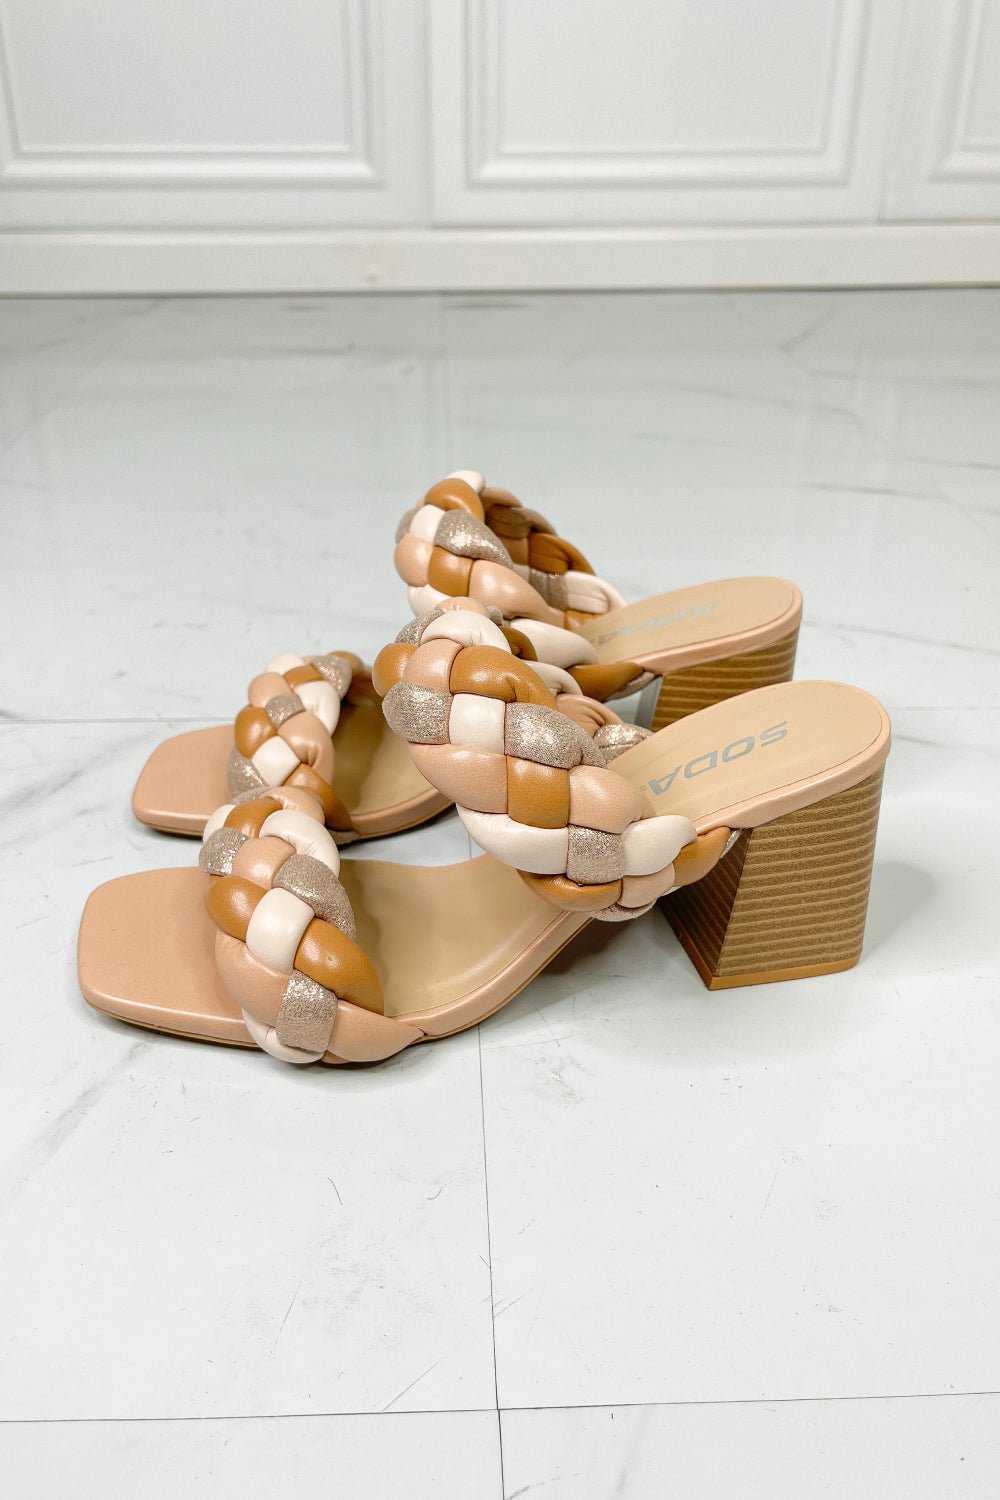 Enchanting Interwoven Dreams - Step into Elegance and Embrace Comfort with Braided Strap Block Heel Slide Sandals. - Guy Christopher